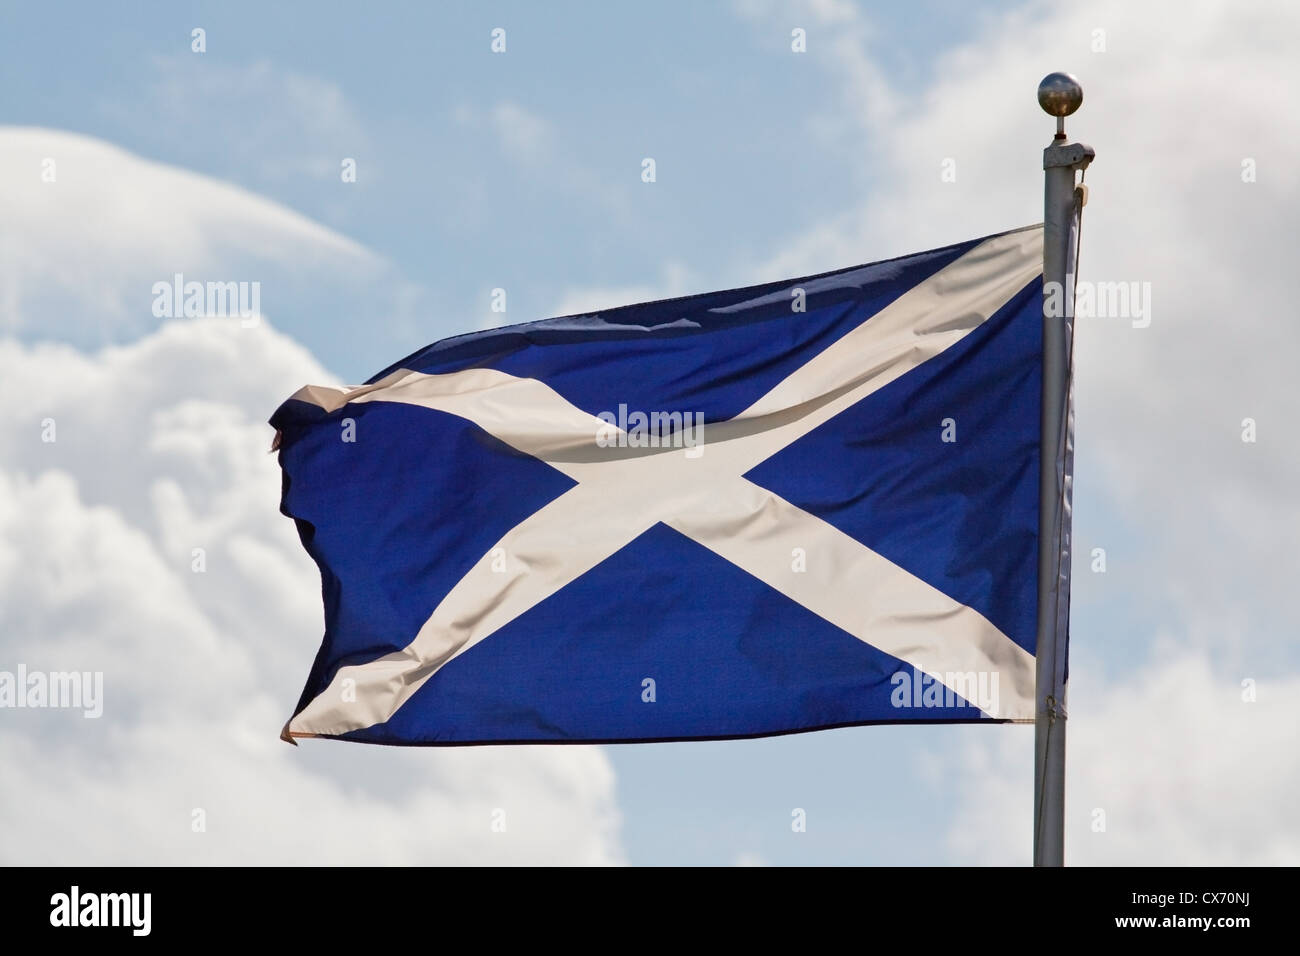 the blue and white cross of st andrew the national flag of scotland ripples in the wind on flagpole Stock Photo